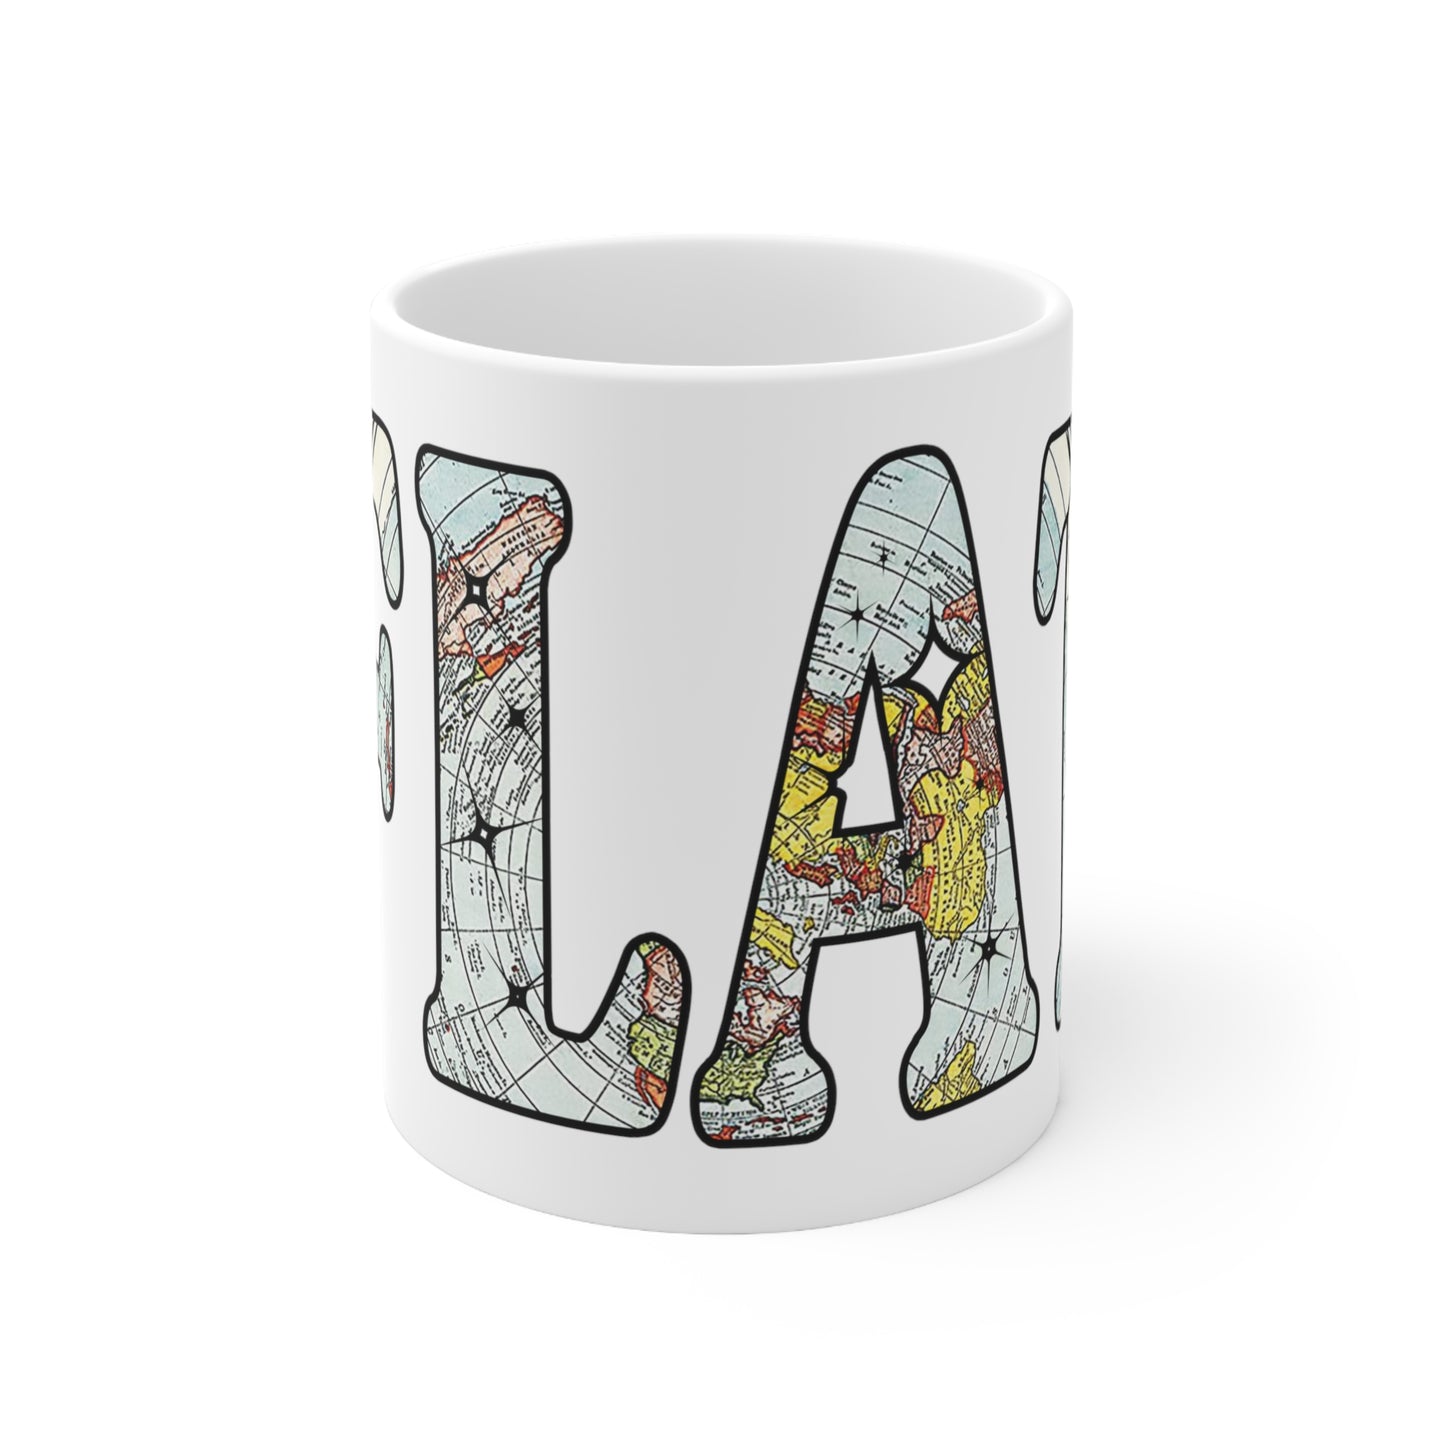 Flat Earth Mug Featuring the Word Flat Cut Out From the Gleason's Flat Earther's White Ceramic Mug 11oz